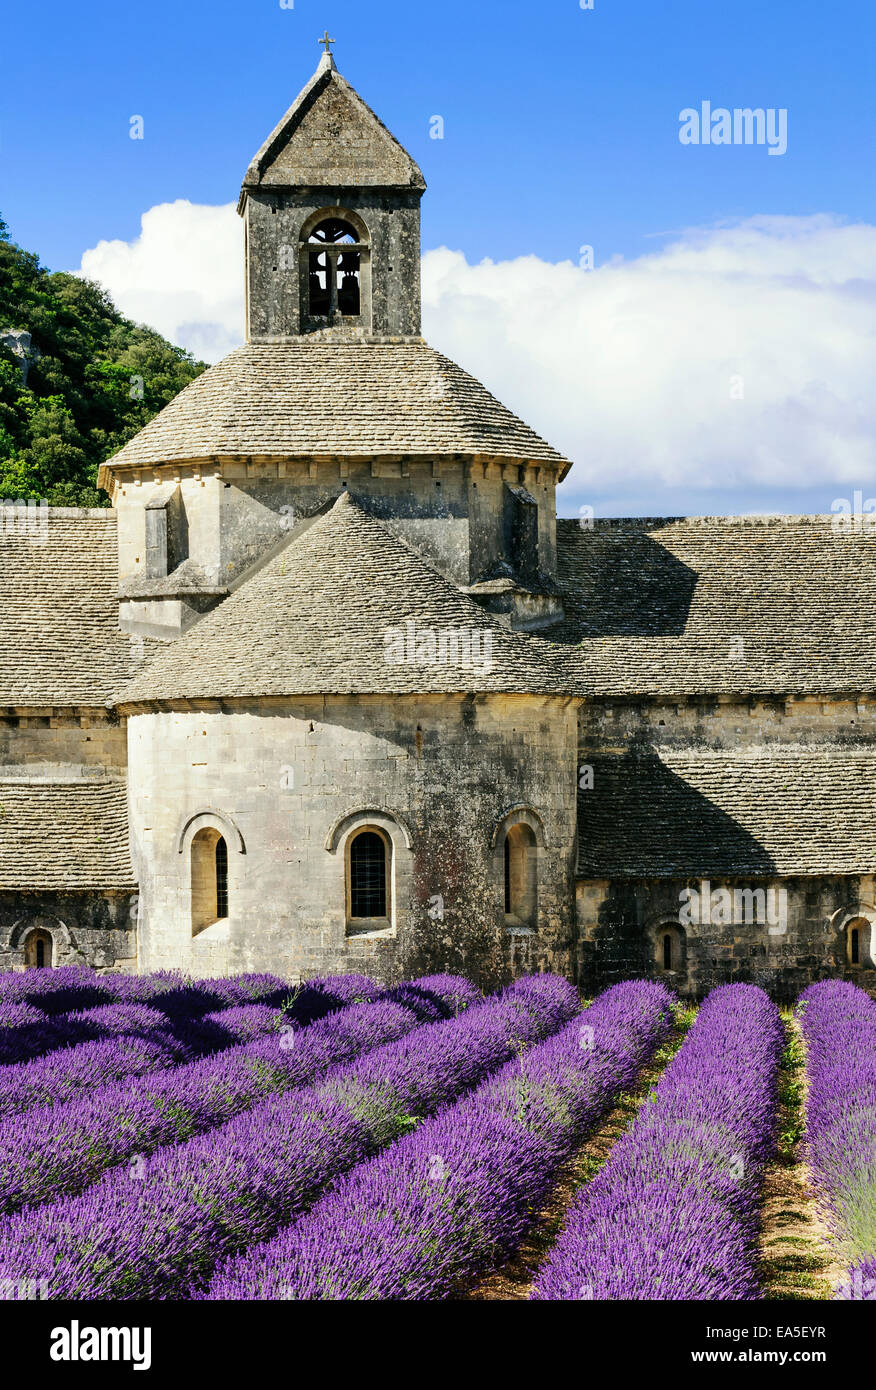 Abbey of Senanque and blooming rows lavender flowers. Gordes, Luberon, Vaucluse, Provence, France. Stock Photo